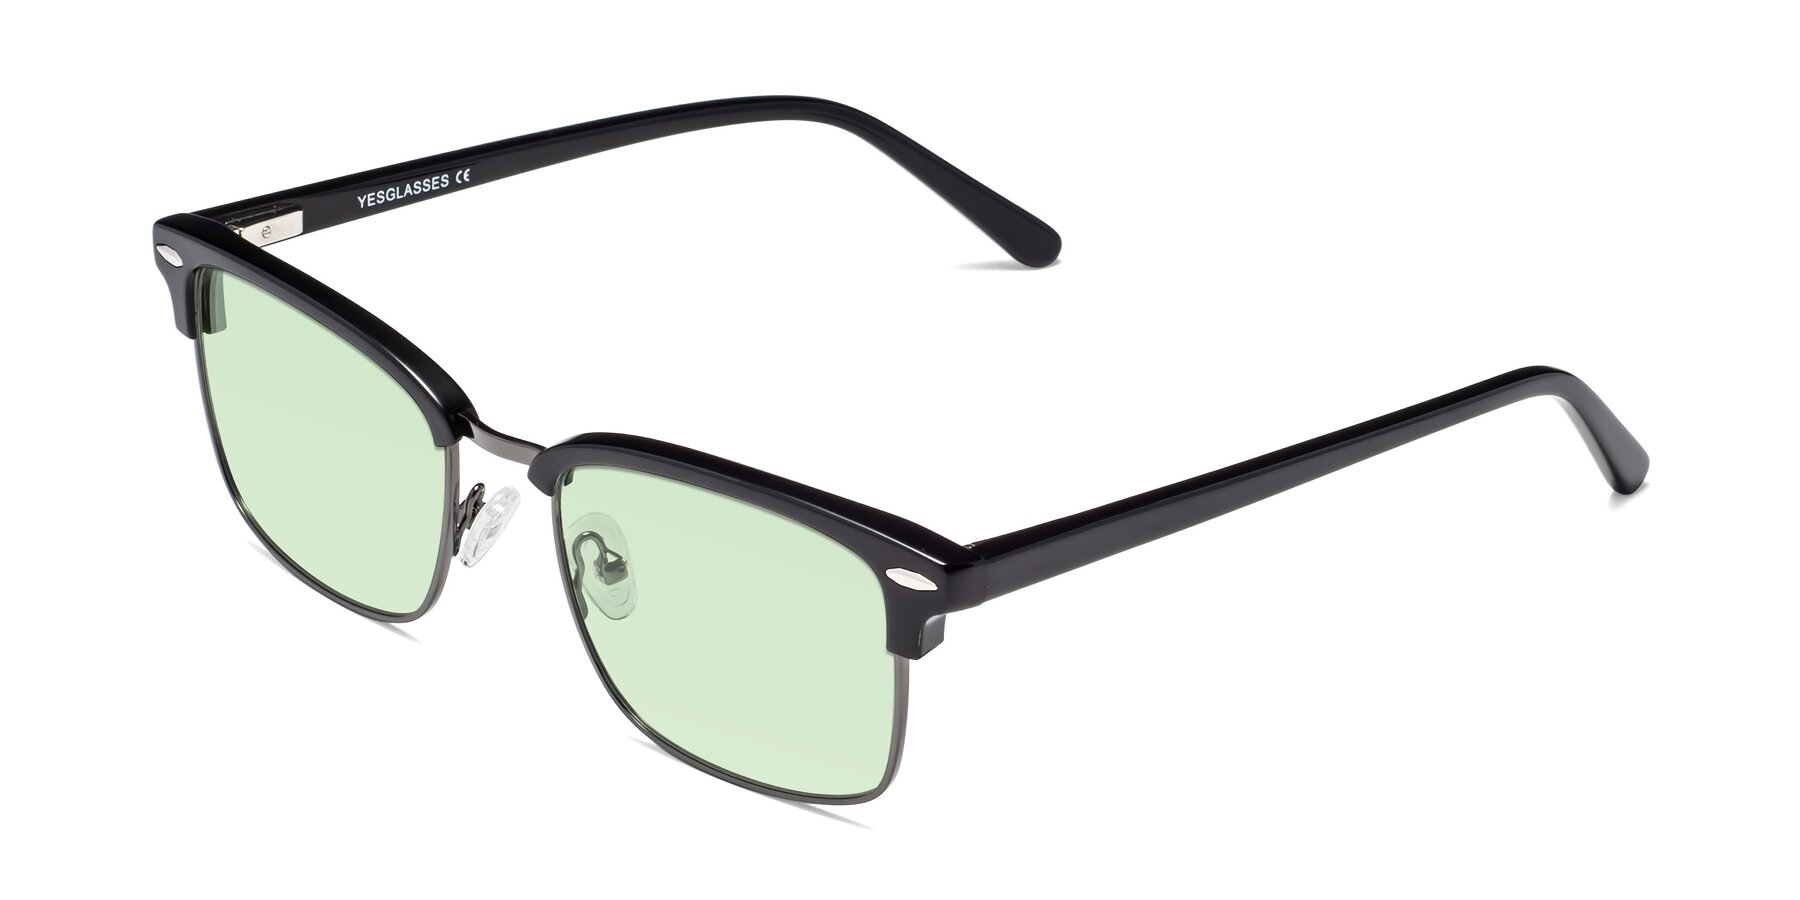 Angle of 17464 in Black-Gunmetal with Light Green Tinted Lenses